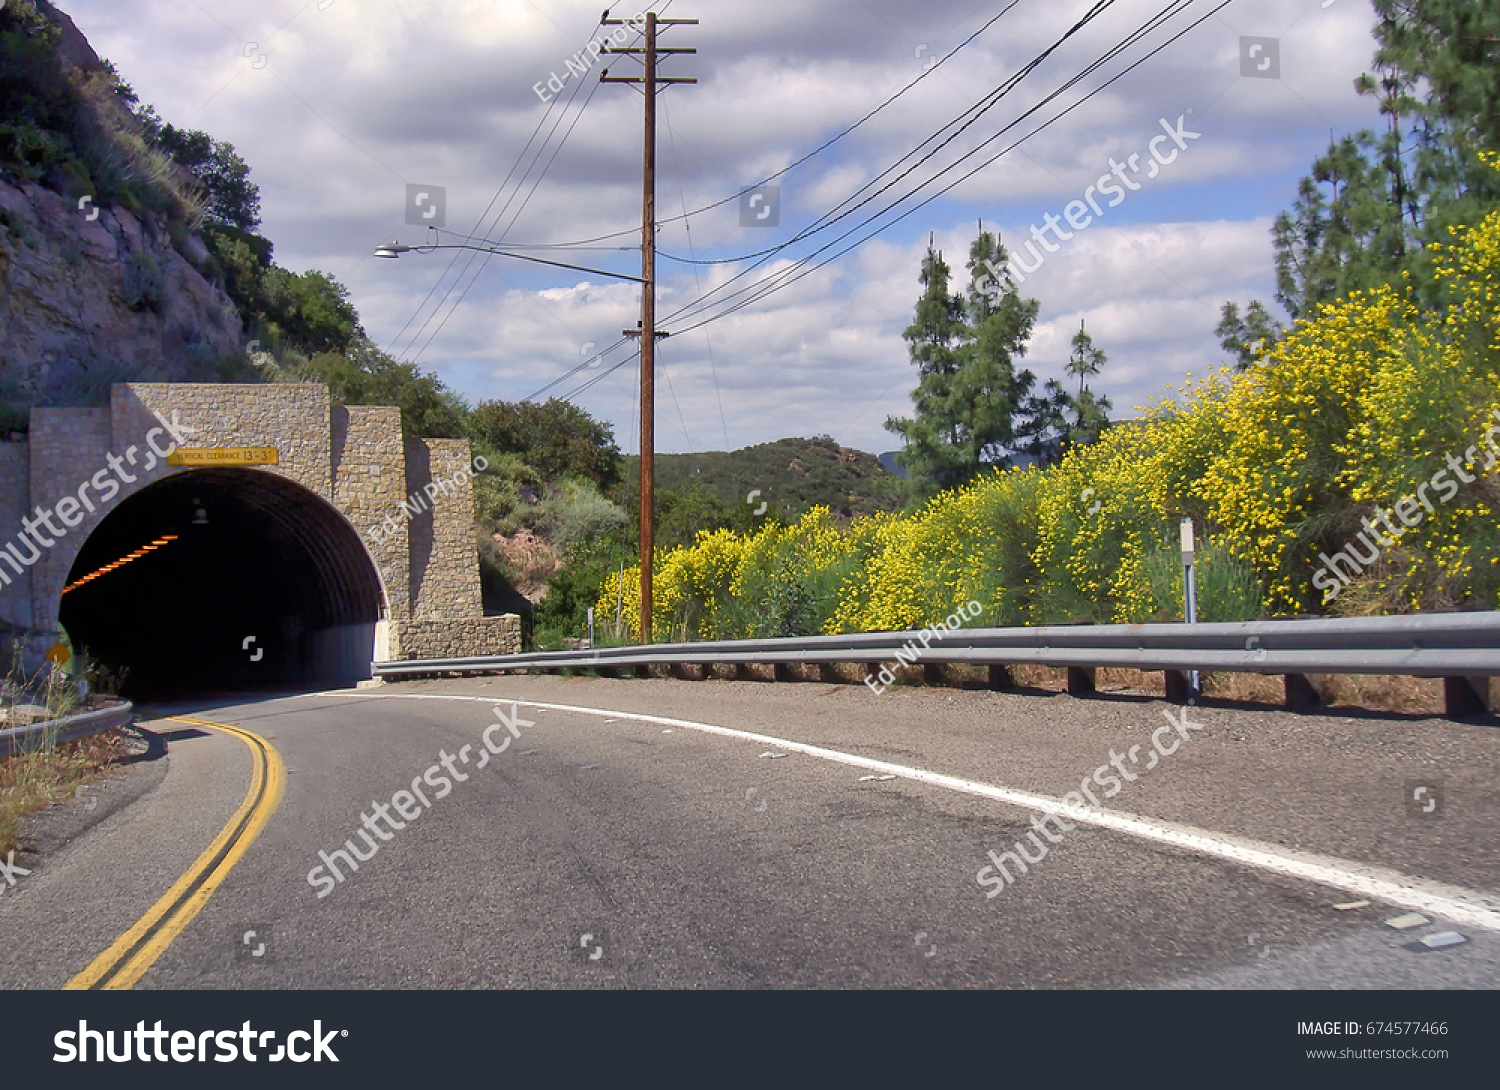 Entrance to Kanan Road tunnel, a Southern California highway surrounded by nature in the Santa Monica mountains recreation area. #674577466